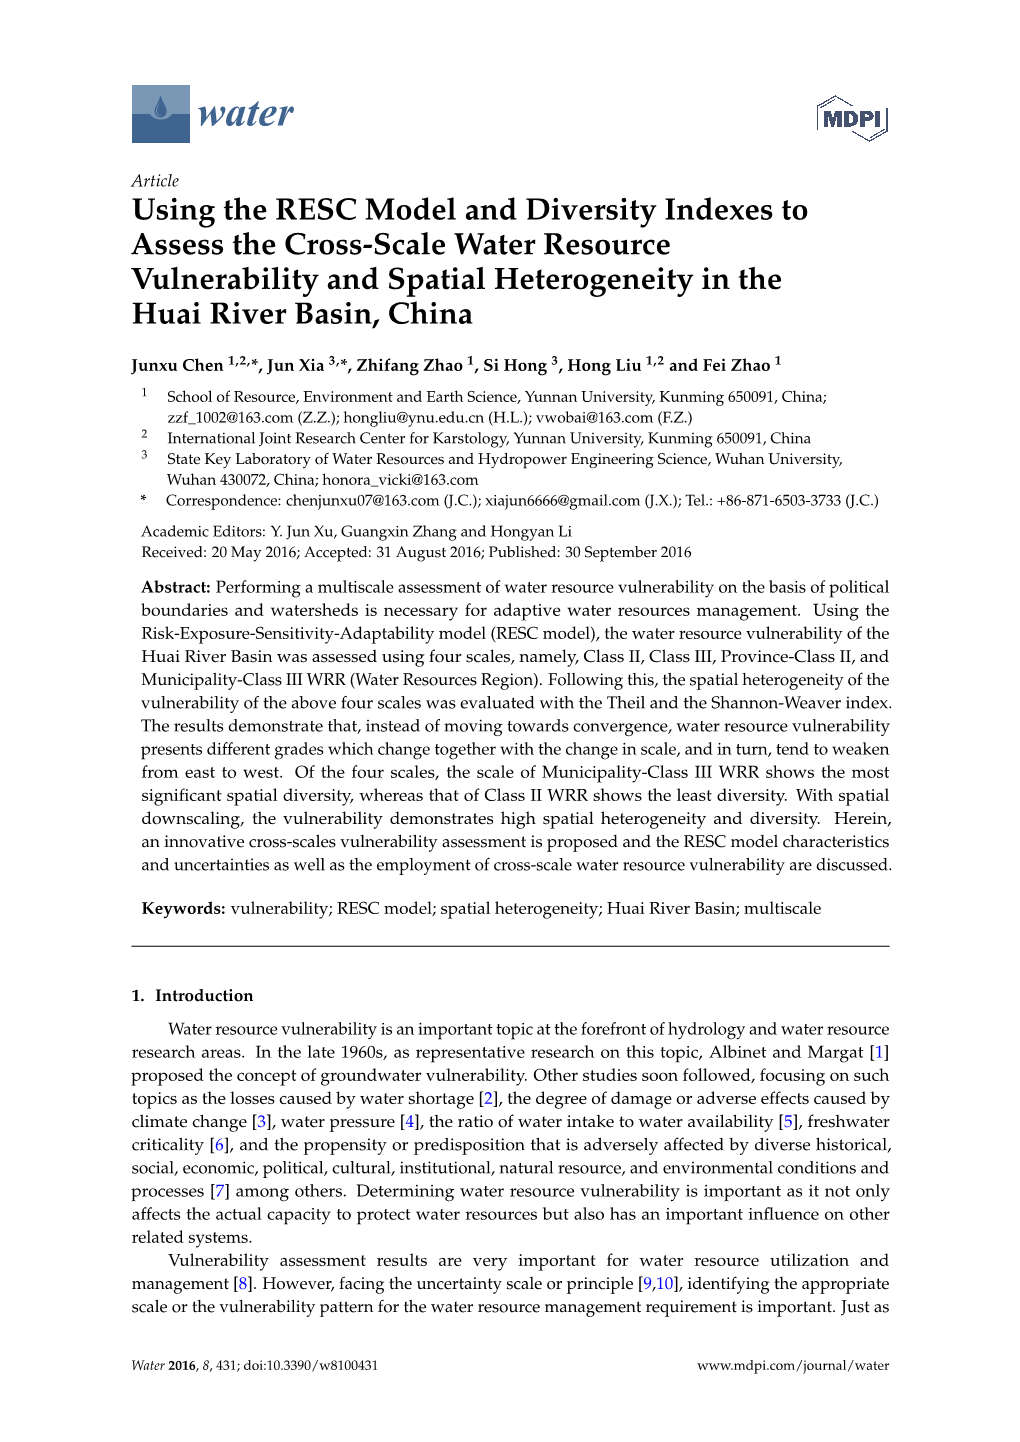 Using the RESC Model and Diversity Indexes to Assess the Cross-Scale Water Resource Vulnerability and Spatial Heterogeneity in the Huai River Basin, China